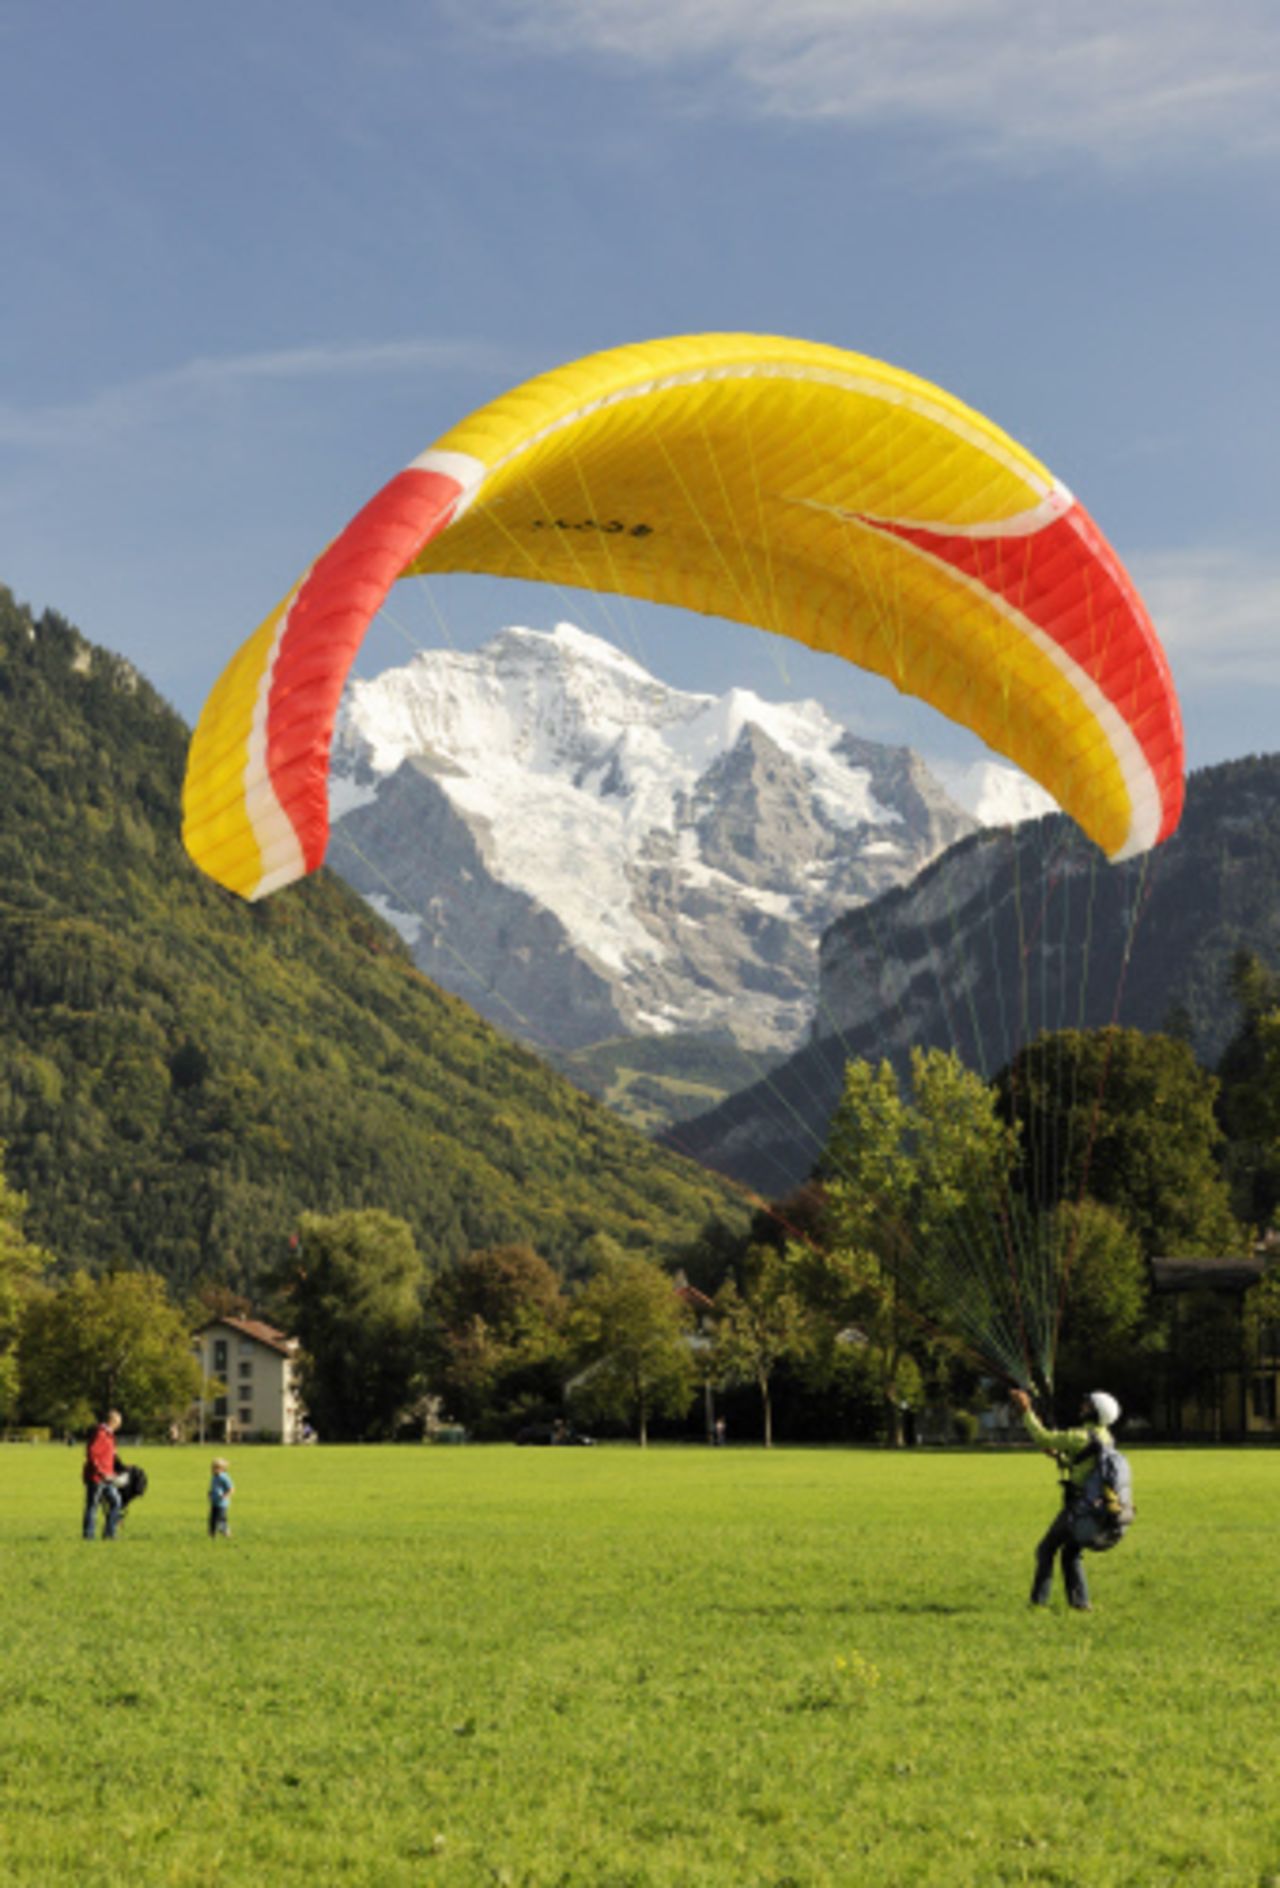 Hoehematt is a popular landing point for paragliders in the center of Interlaken. The field is well-visited by tourists who enjoy keeping both feet firmly planted on the ground.